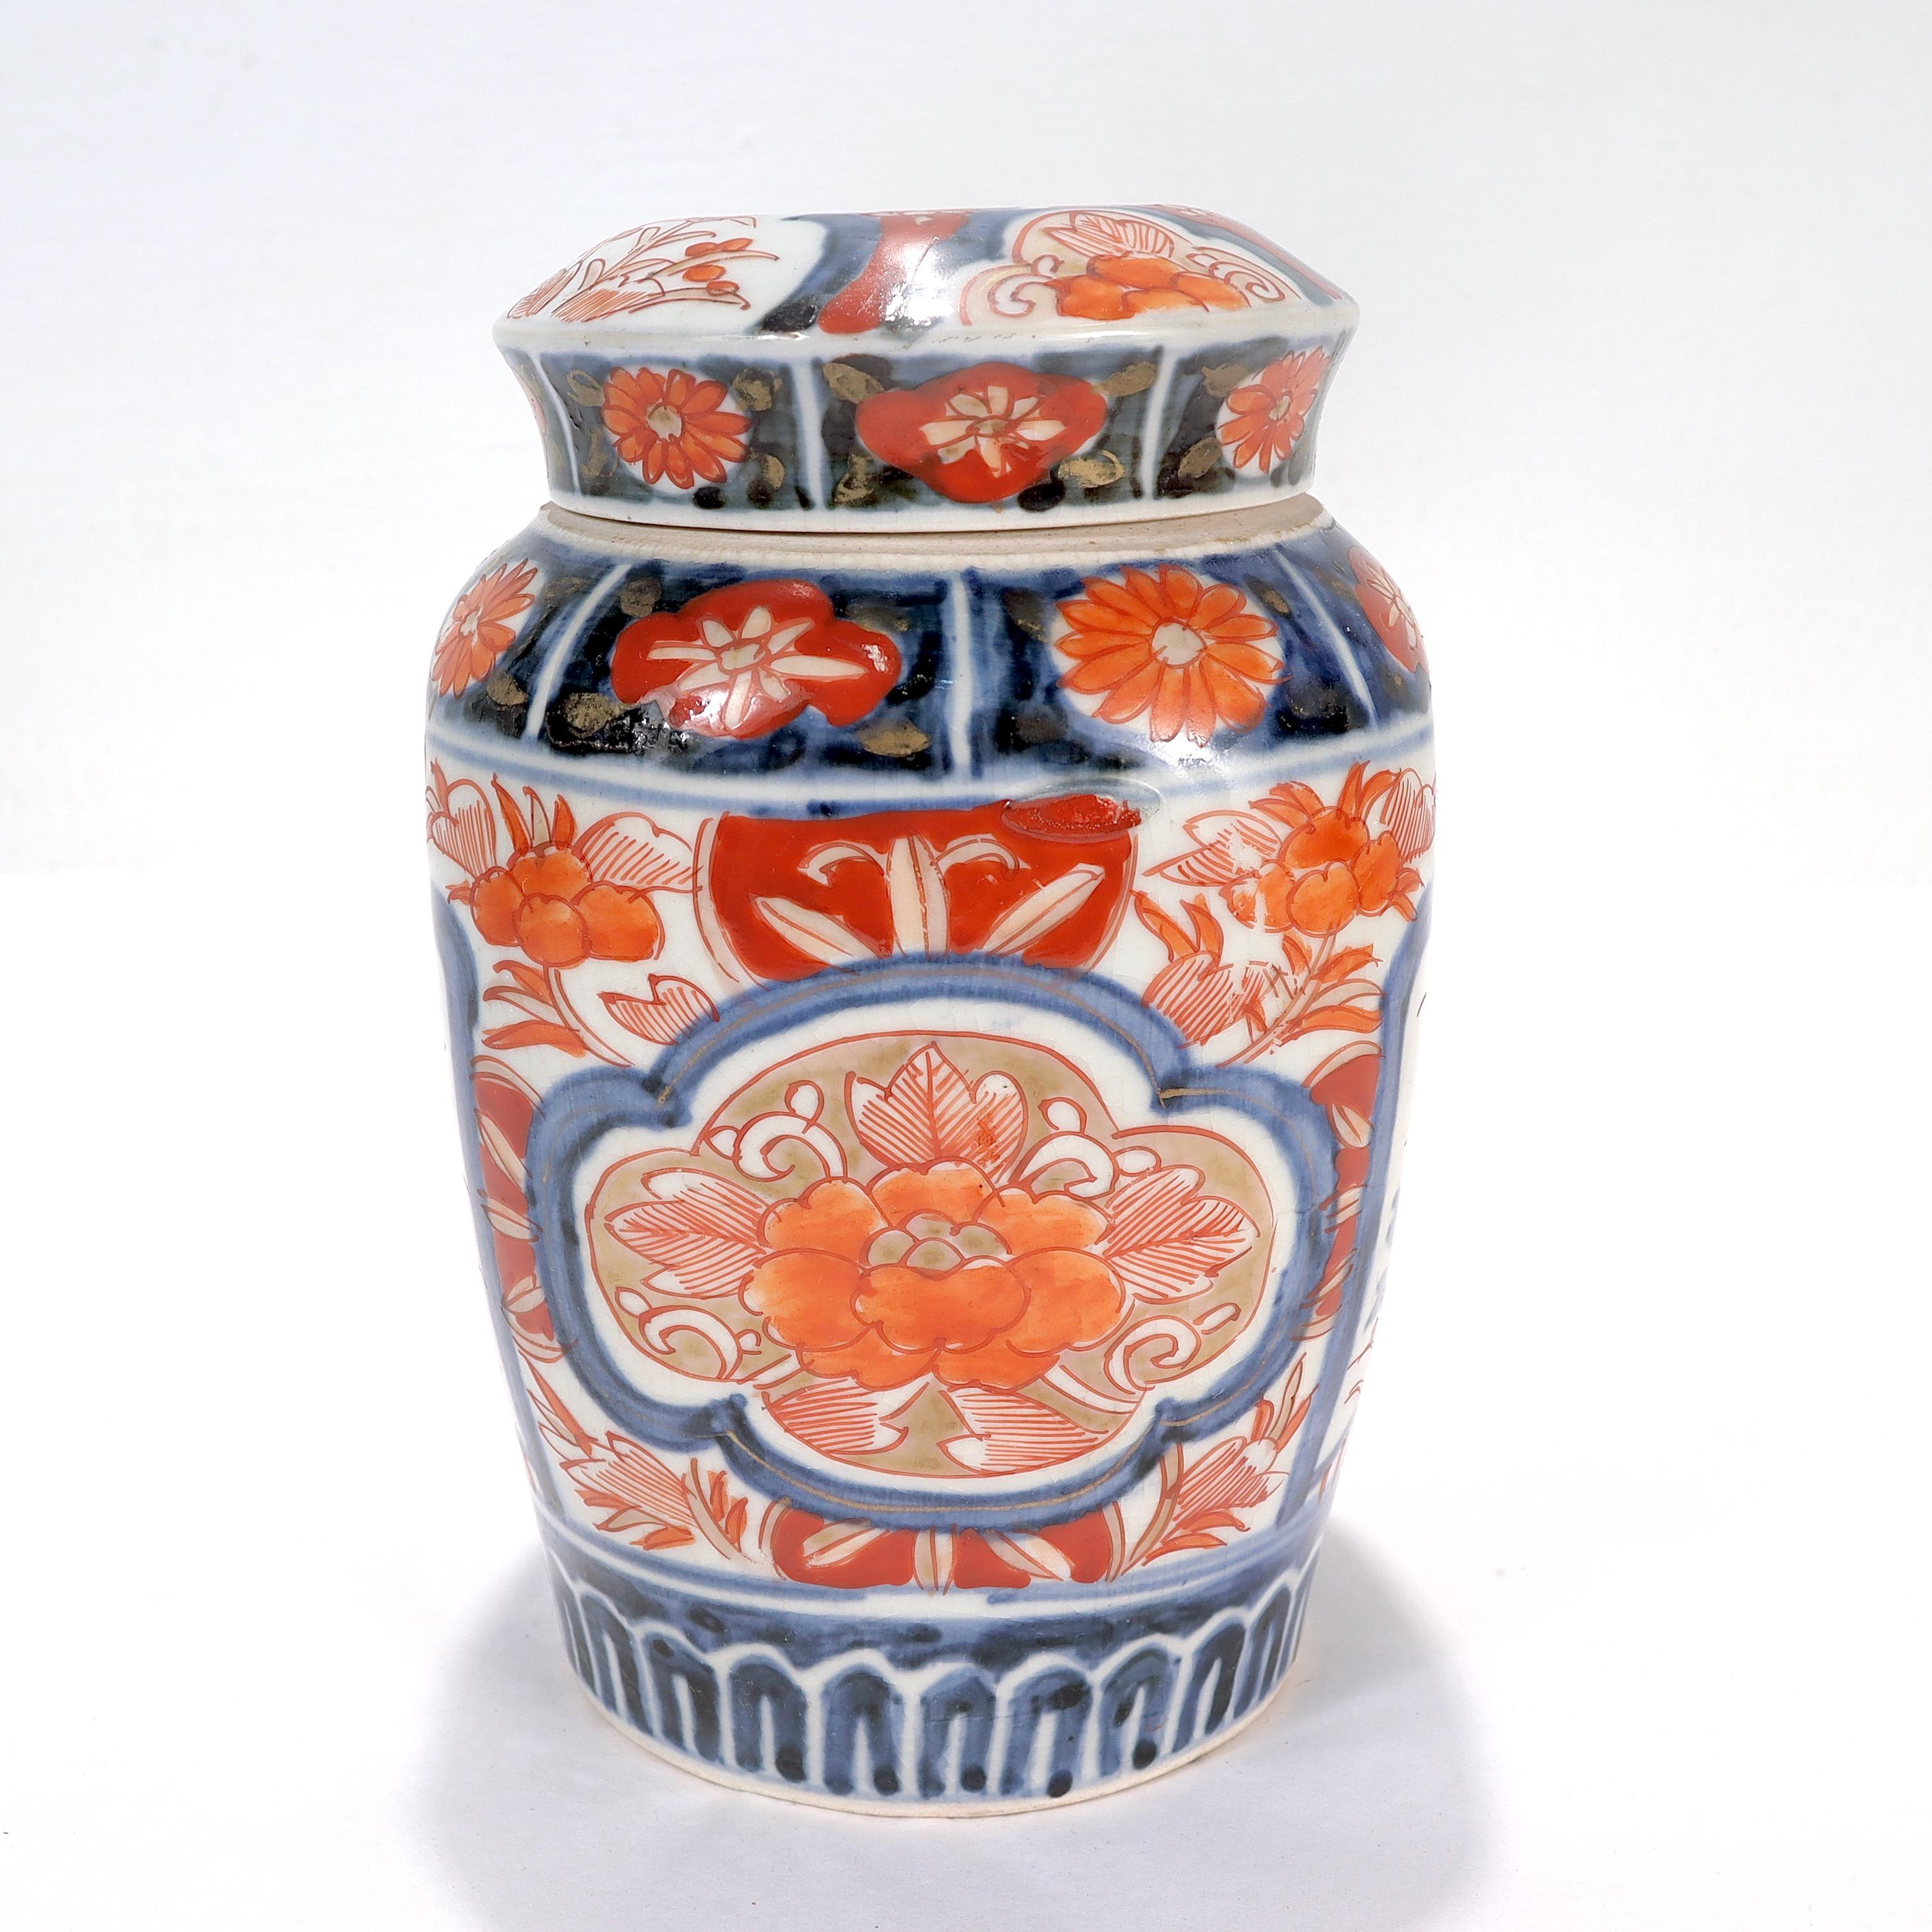 Old or Antique Japanese Imari Porcelain Covered Jar or Urn In Good Condition For Sale In Philadelphia, PA